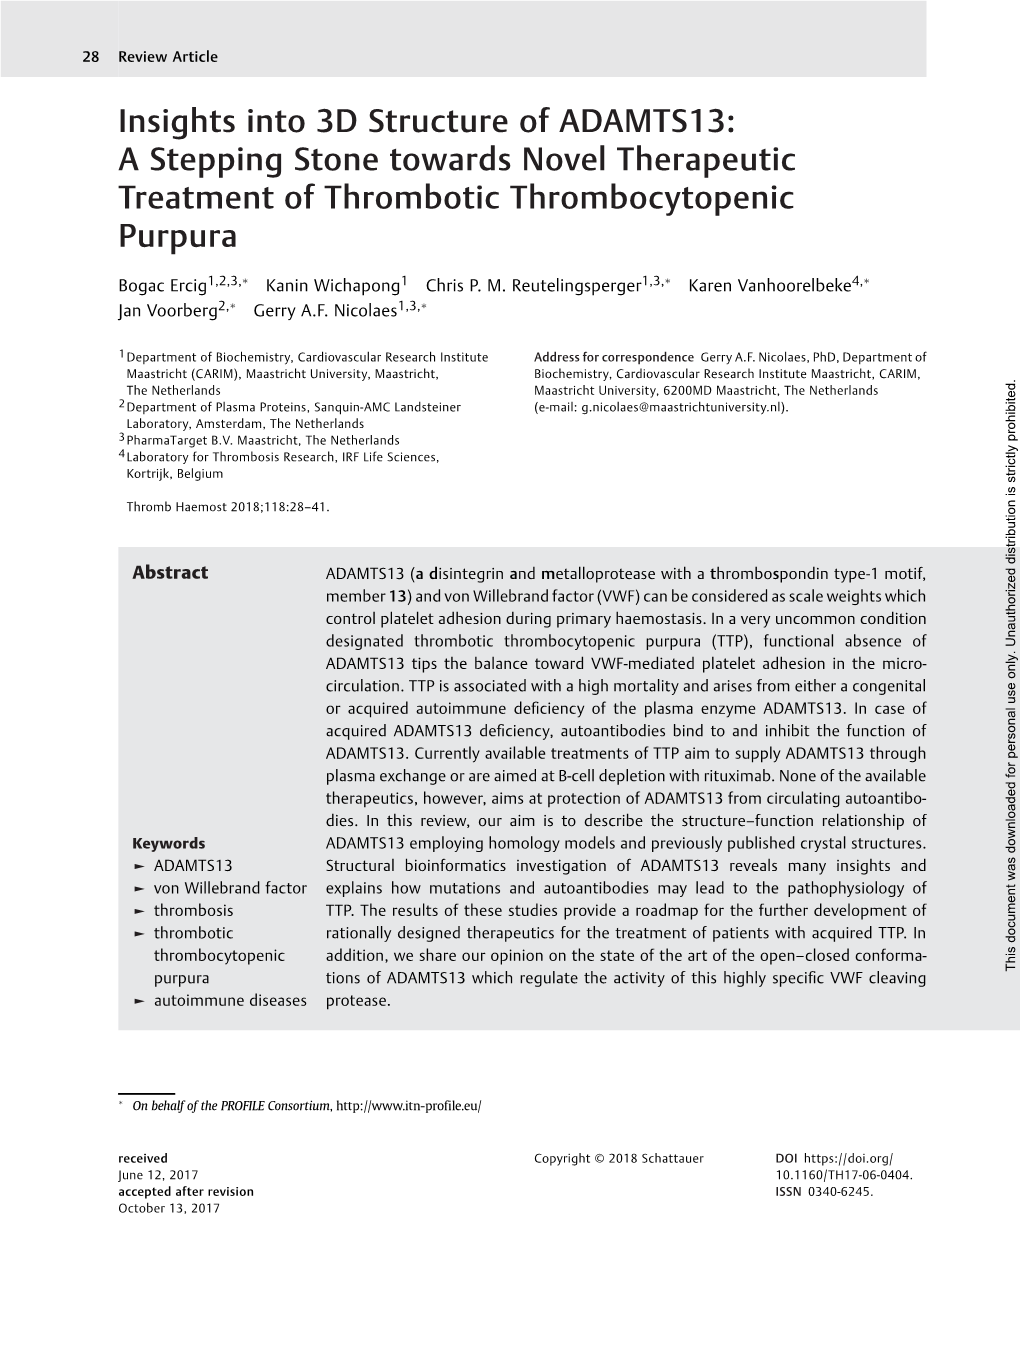 Insights Into 3D Structure of ADAMTS13: a Stepping Stone Towards Novel Therapeutic Treatment of Thrombotic Thrombocytopenic Purpura